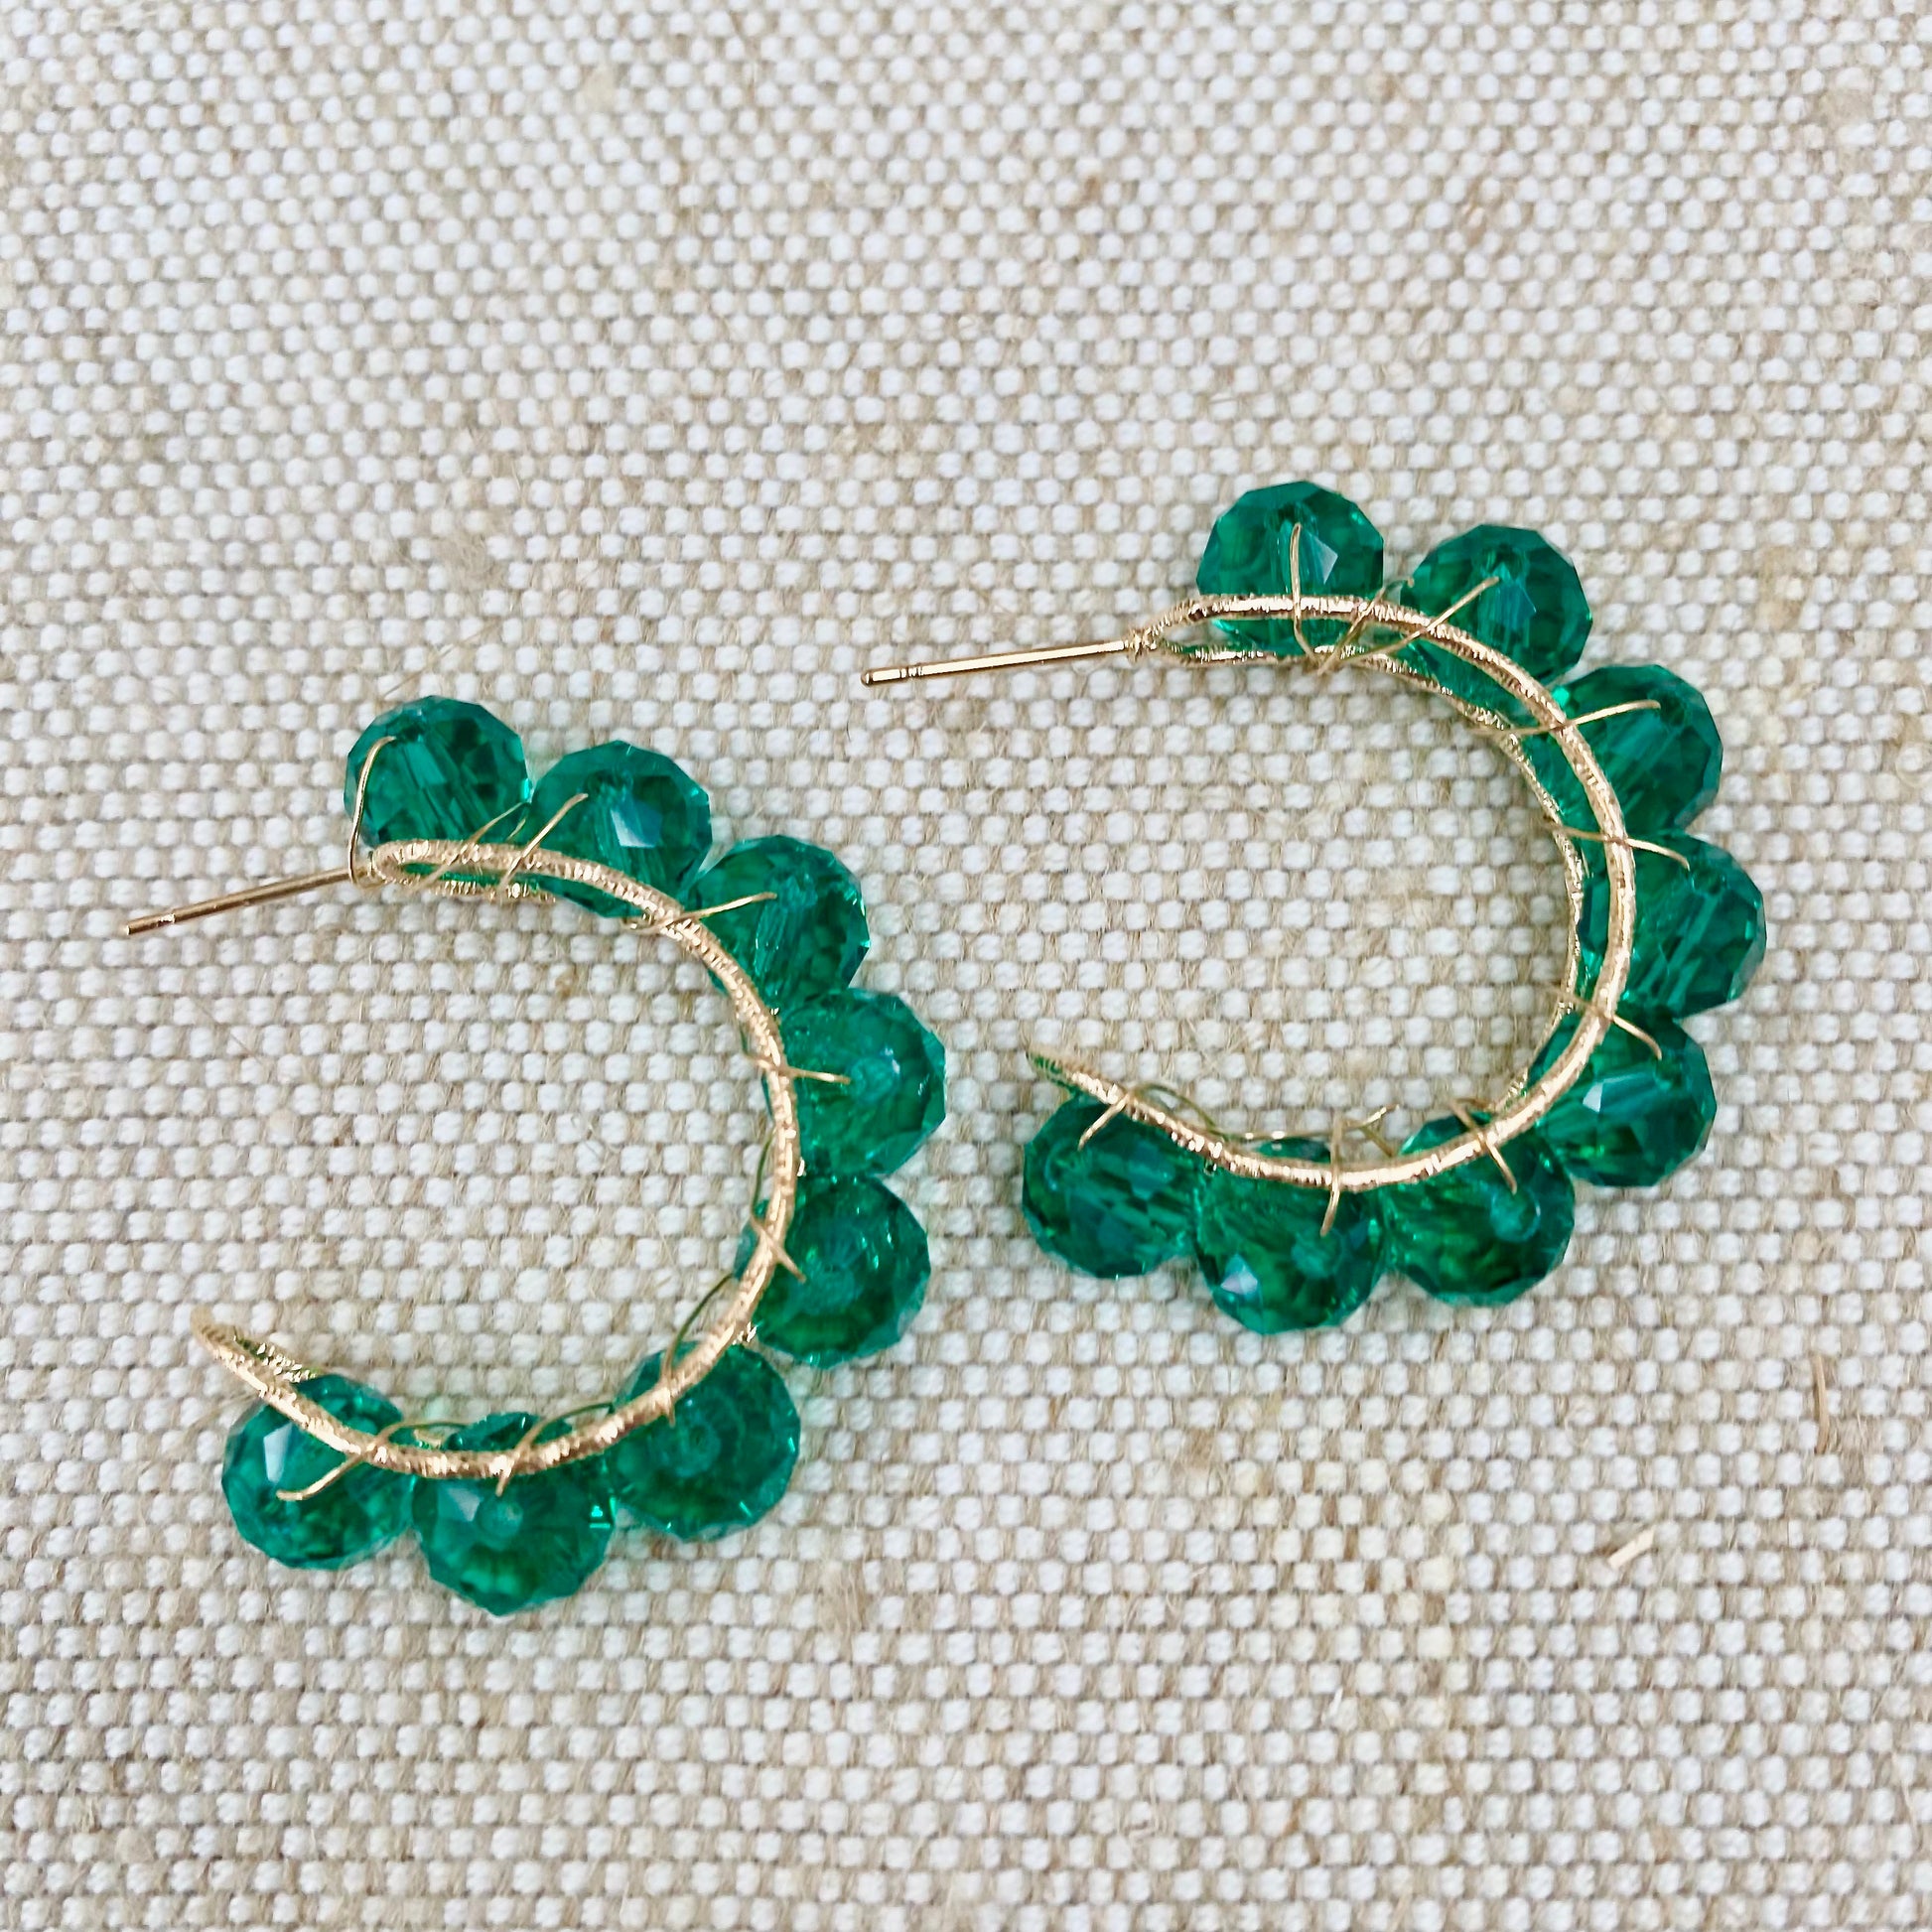      Gold tone hoops with wrapped wire bead detailing     Post and stud back fastening     Drop 3cm     Available in Blue, Green, Red and Gold     FREE UK SHIPPING